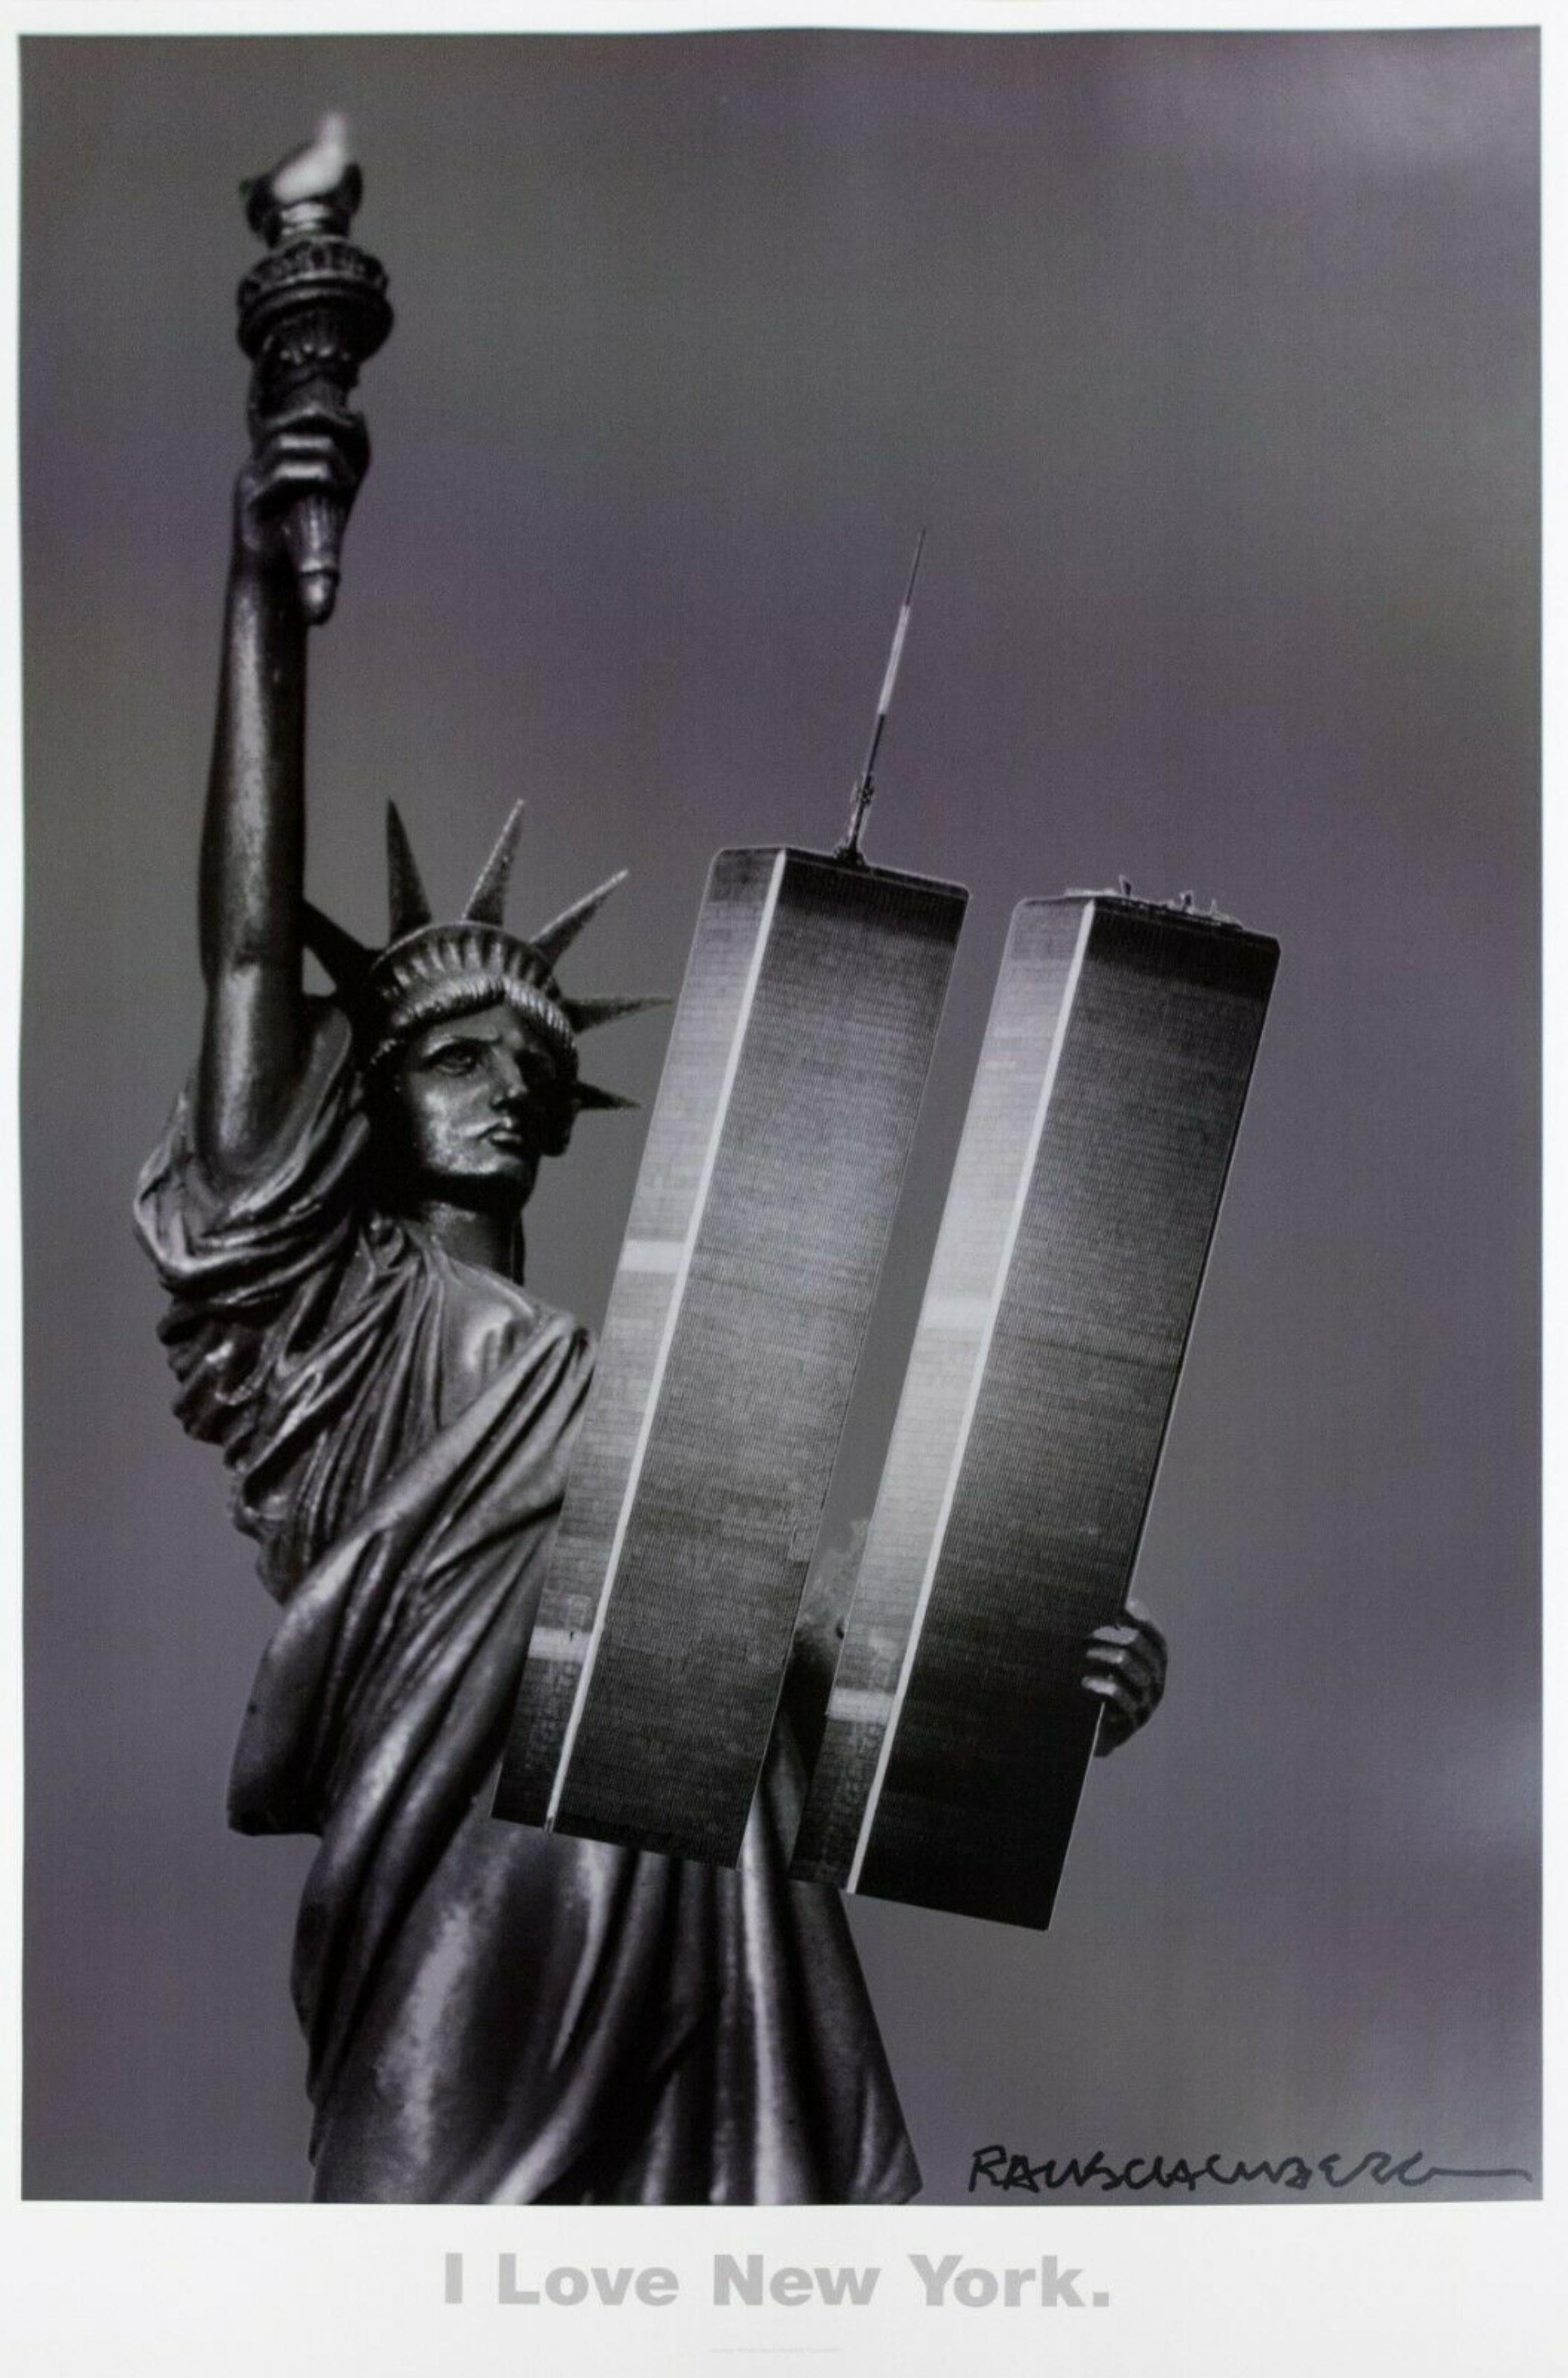 I Love New York, Lt Ed print: Statue of Liberty & Twin Towers LARGE 39.25" x 25"